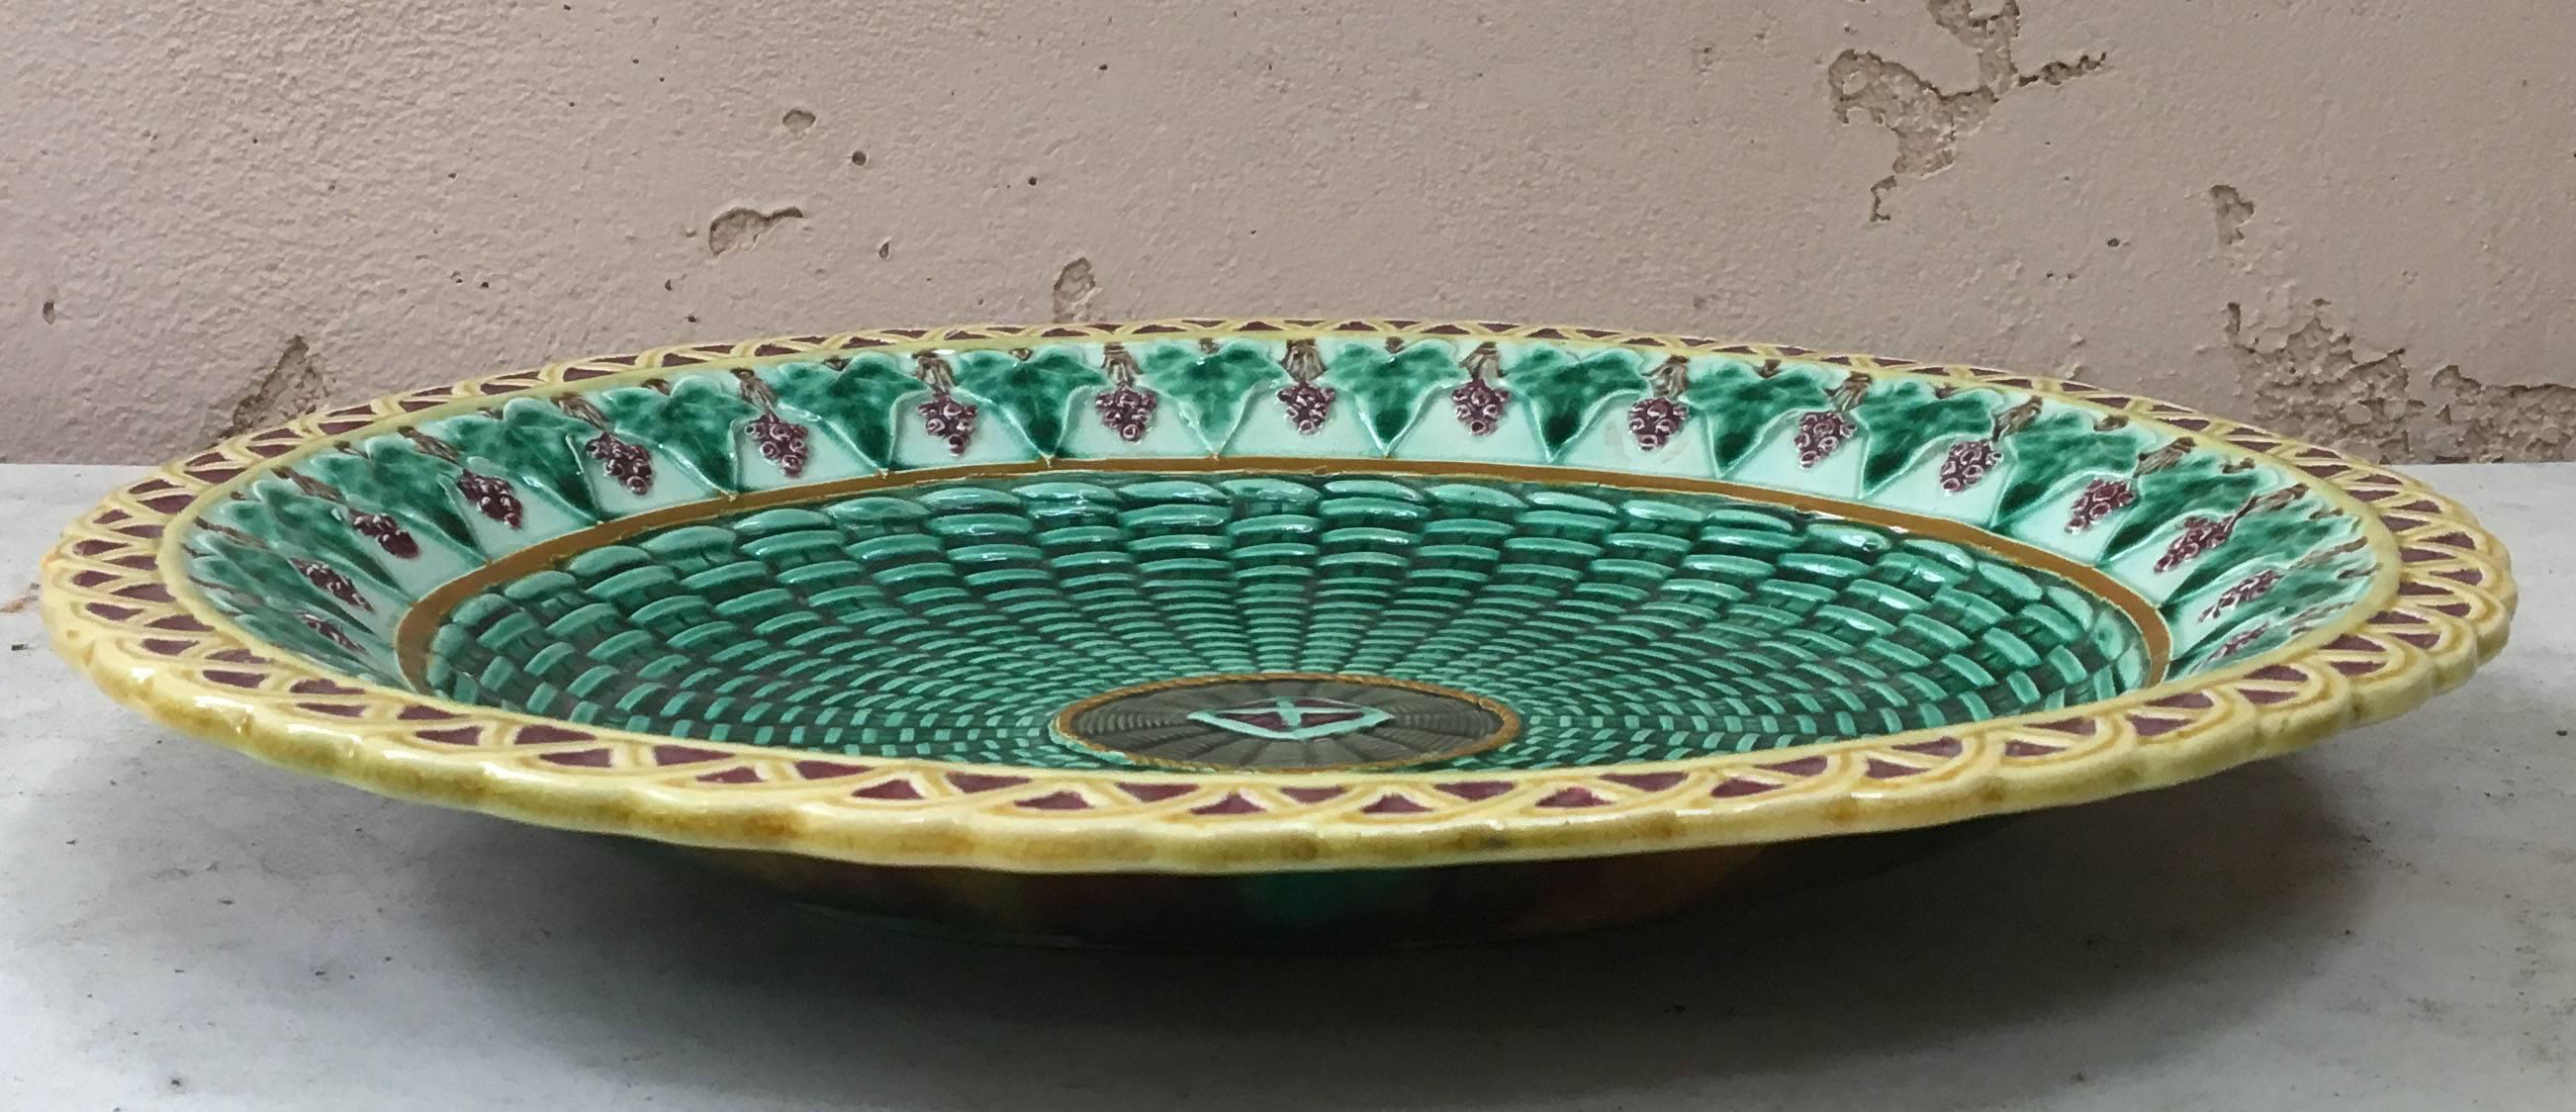 Victorian English Majolica Wicker and Ivy Leaves Platter Wedgwood